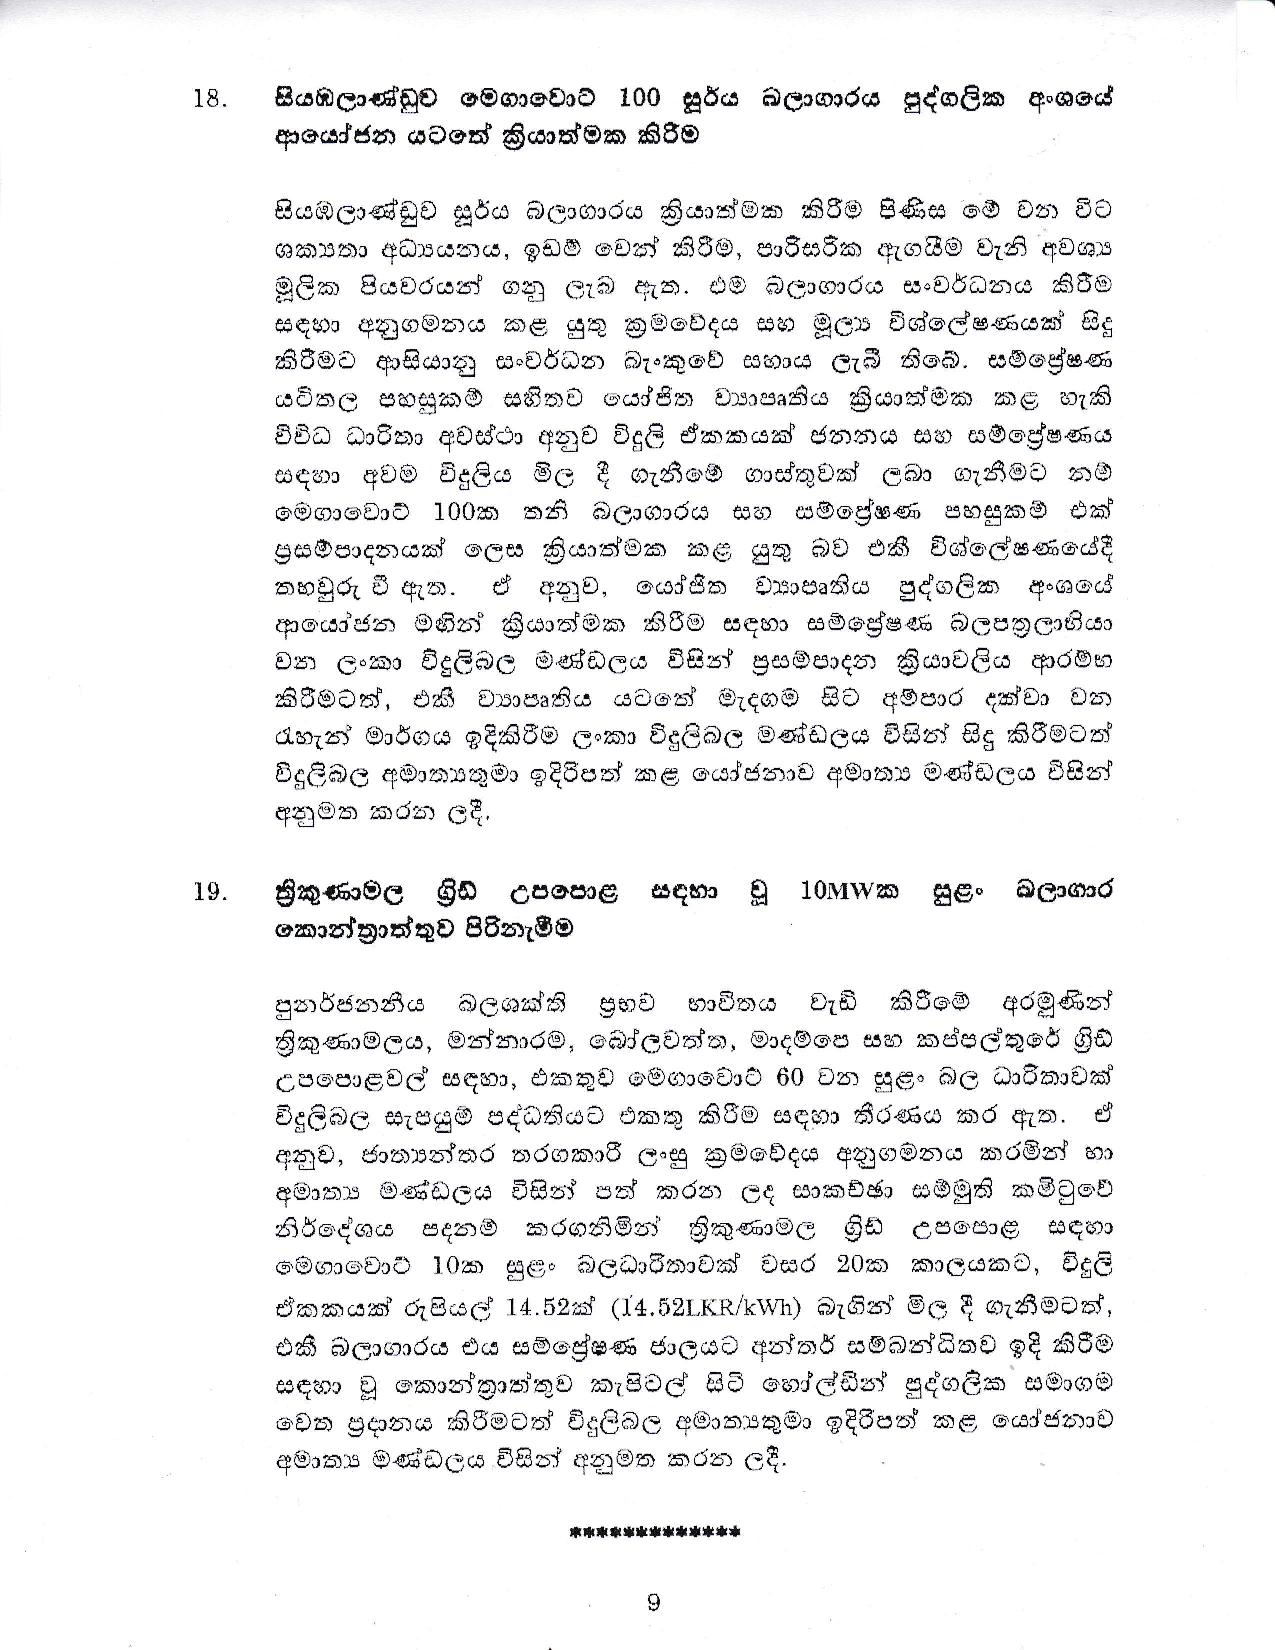 Cabinet Decision on 07.12.2020 page 009